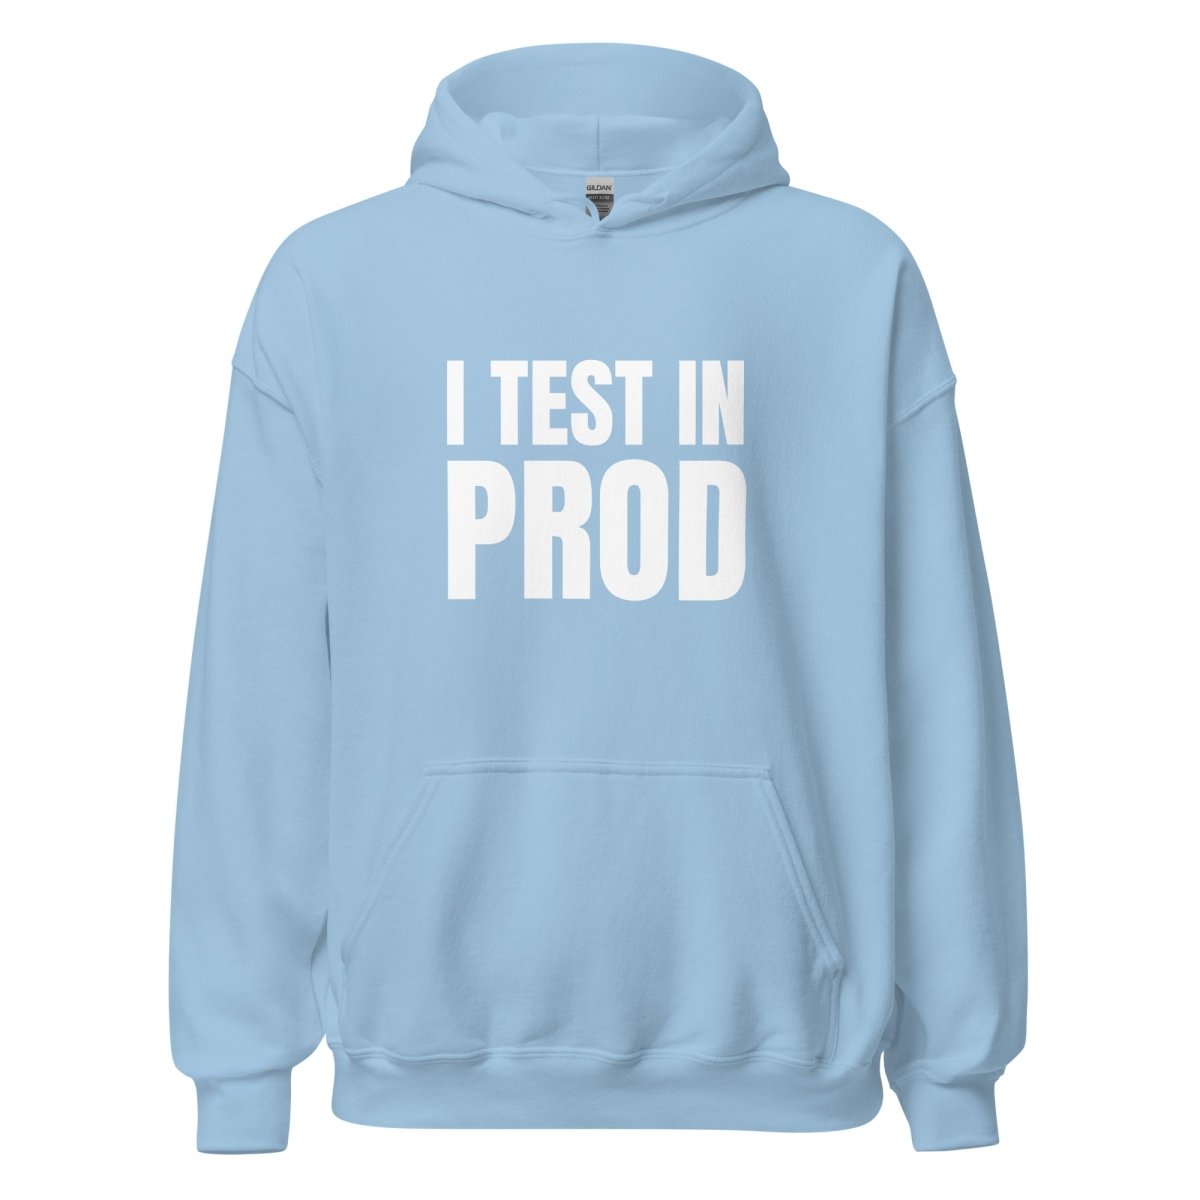 I Test in Prod Hoodie (unisex) - Light Blue - AI Store